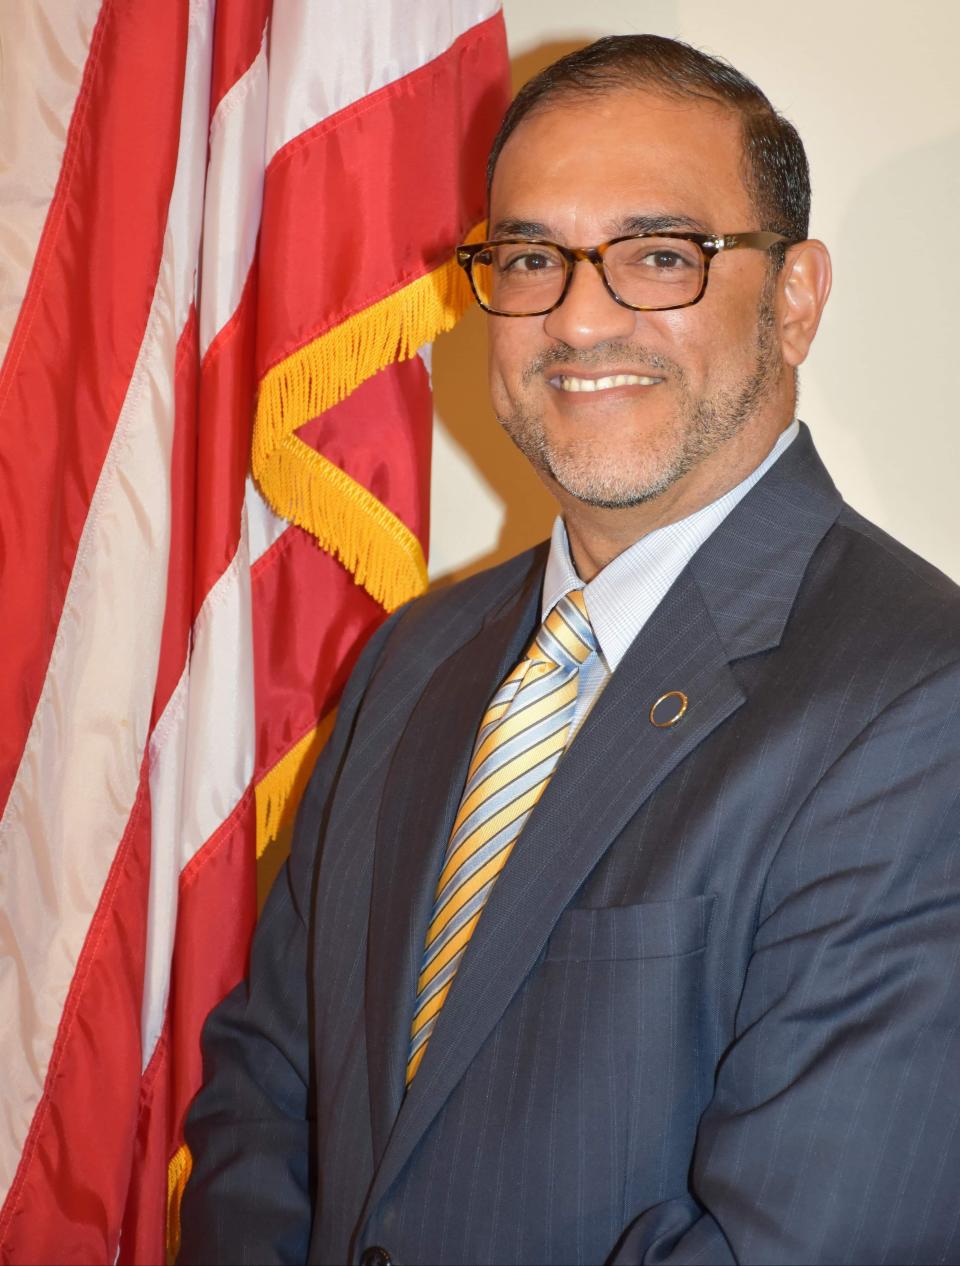 Victor Ramos is running for the District 5 Volusia County Council seat.